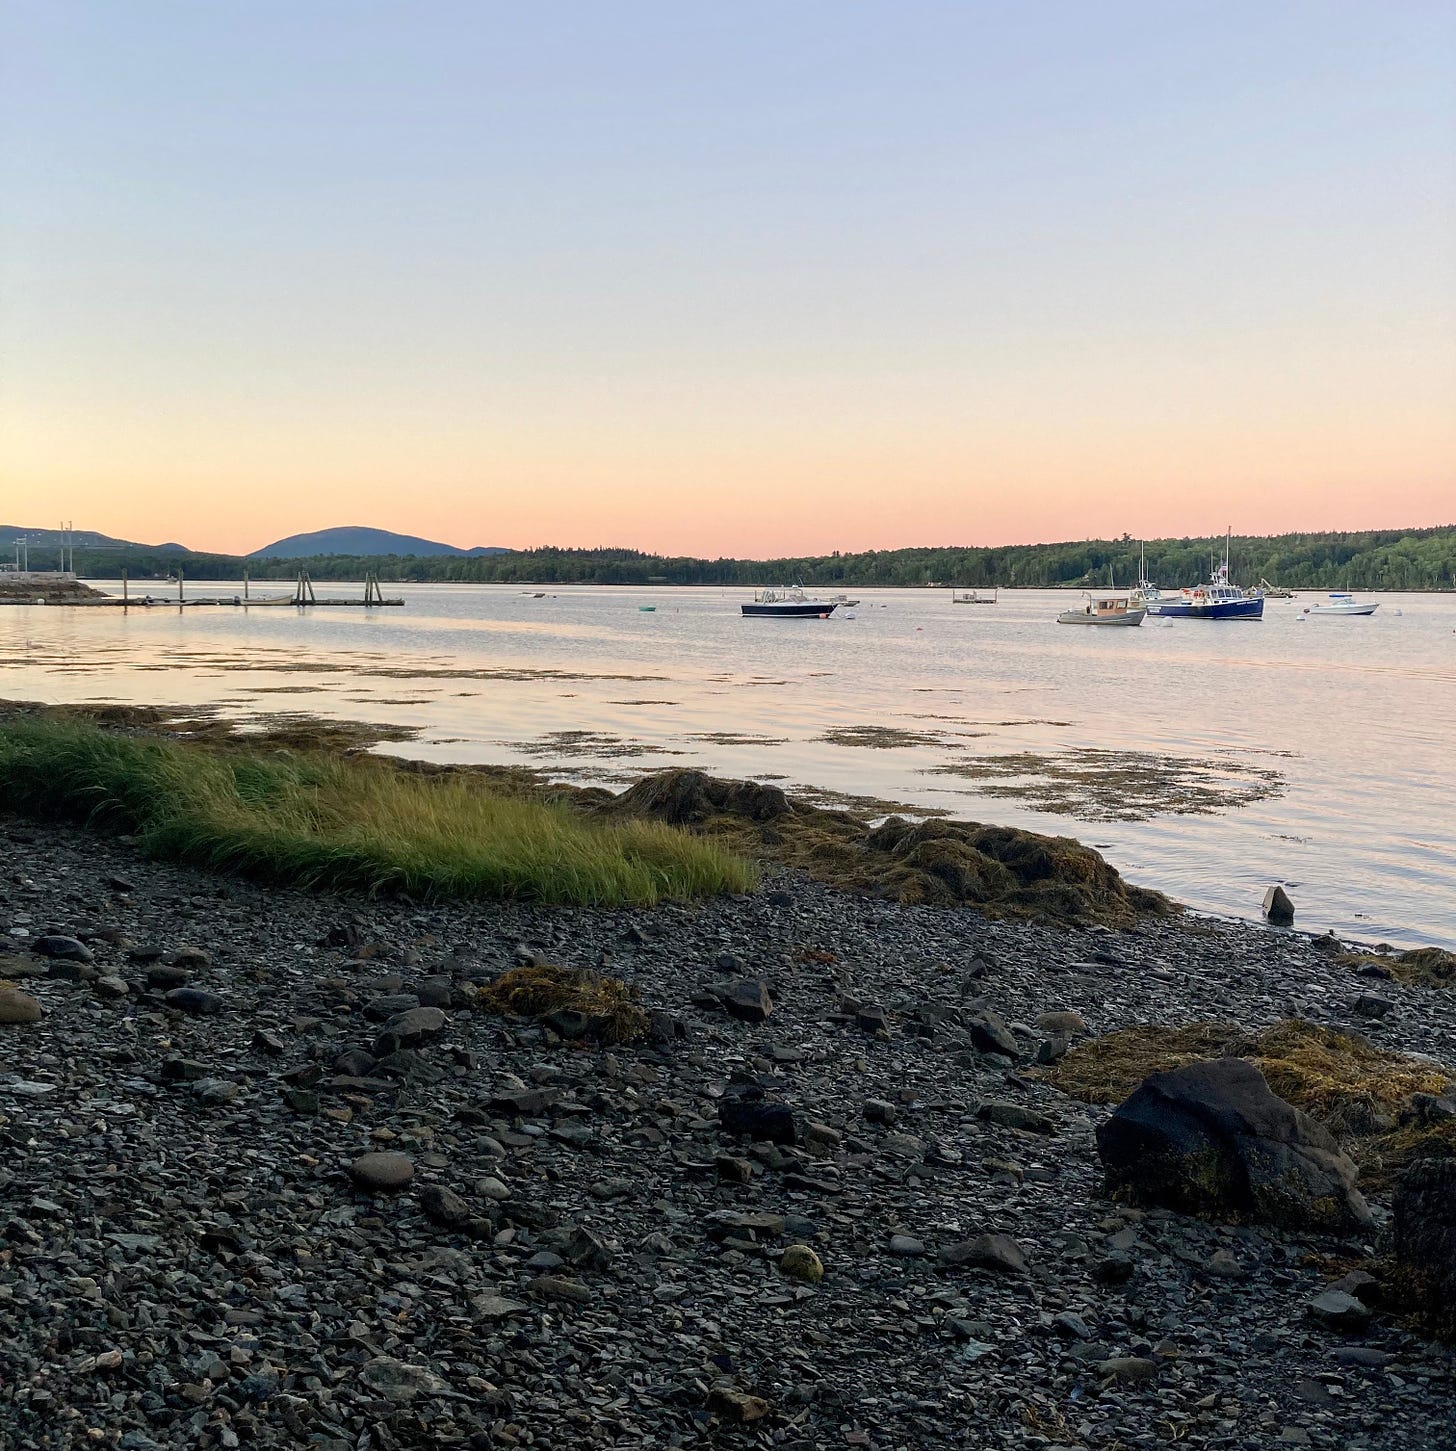 Sunrise on a rocky beach. There are lobster boats clustered in the water.